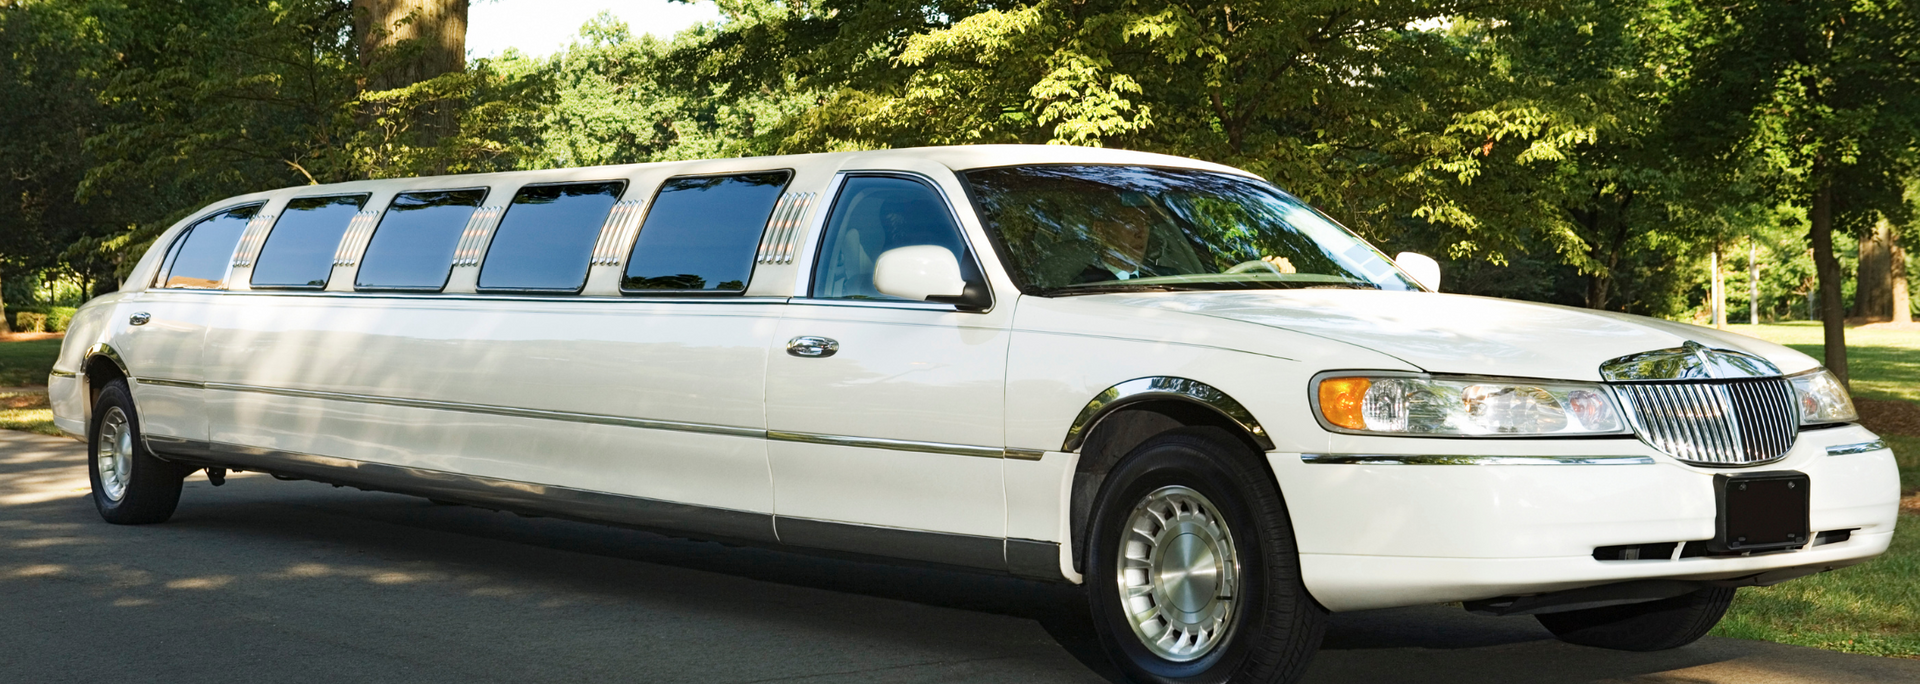 Picture of a limousine